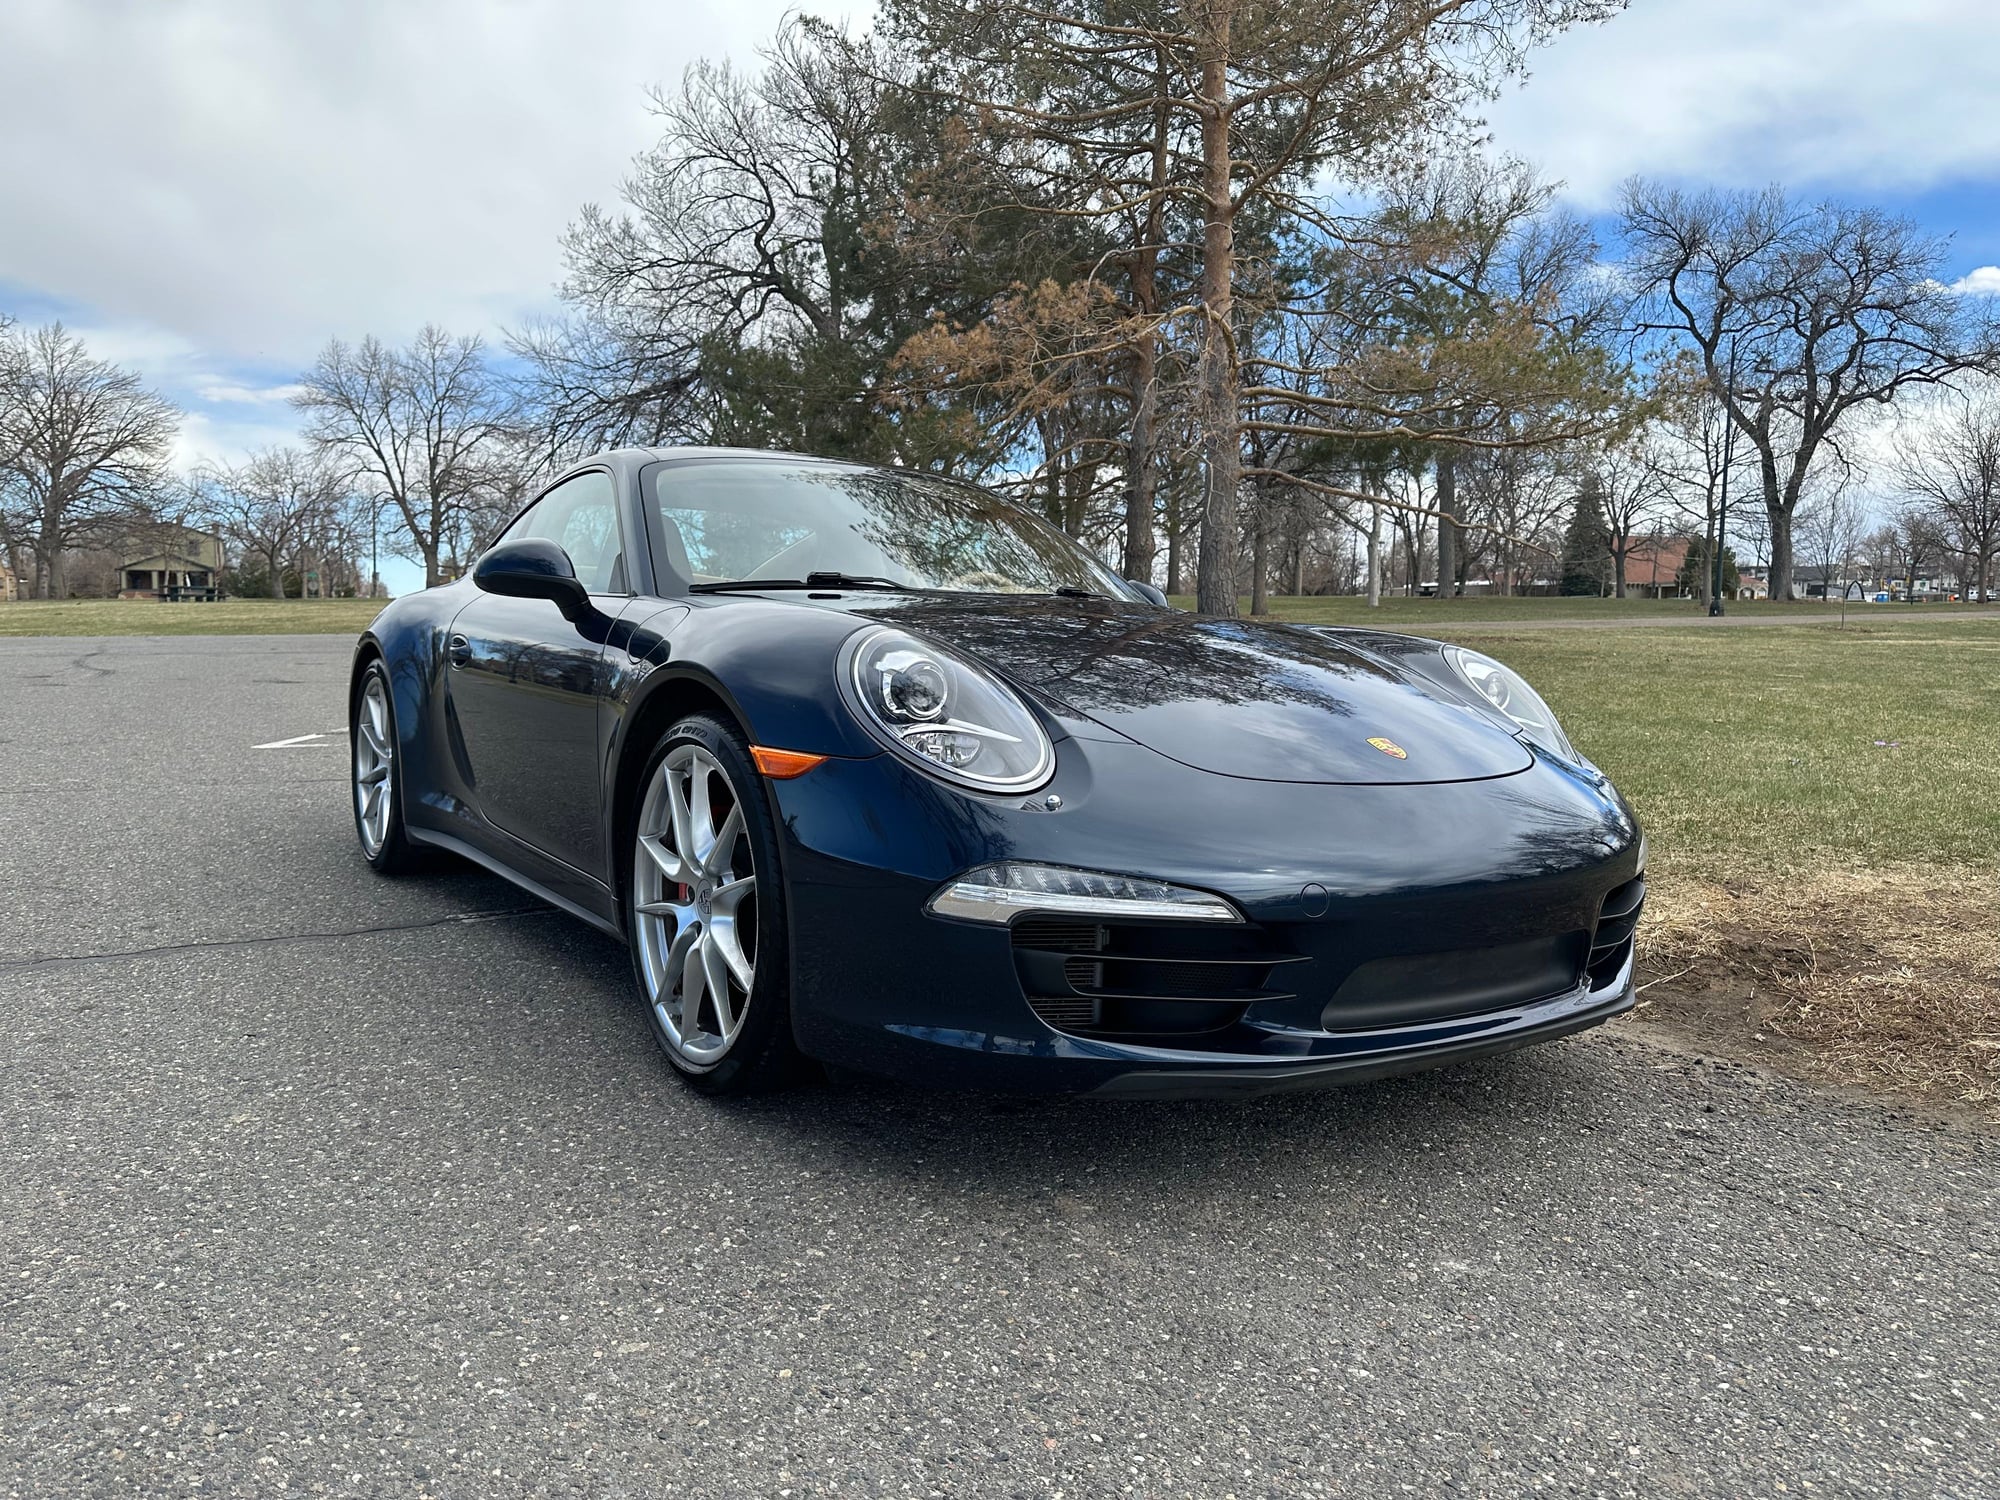 2014 Porsche 911 - 2014 911 Carrera 4S Coupe, Manual Transmission,  blue over beige, 41k miles - Used - VIN WP0AB2A97ES120106 - 41,211 Miles - 6 cyl - AWD - Manual - Coupe - Blue - Denver, CO 80212, United States